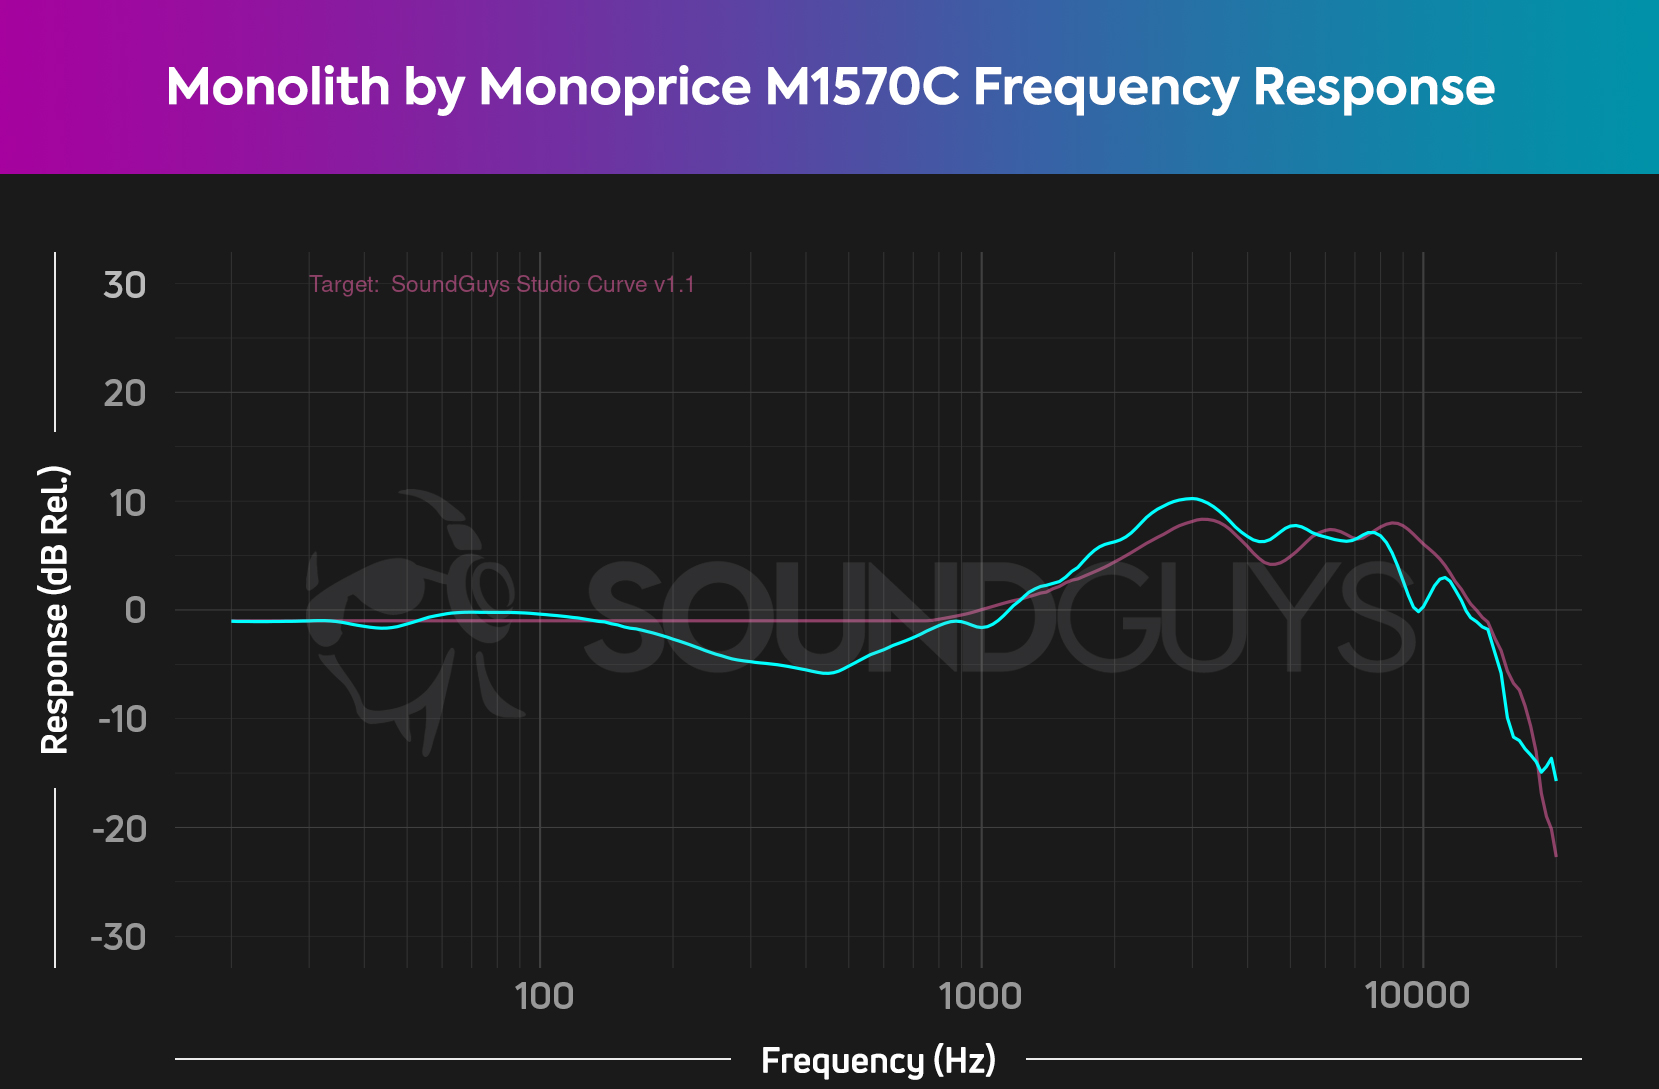 Frequency response of the Monolith by Monoprice M1570C compared to the studio target curve.